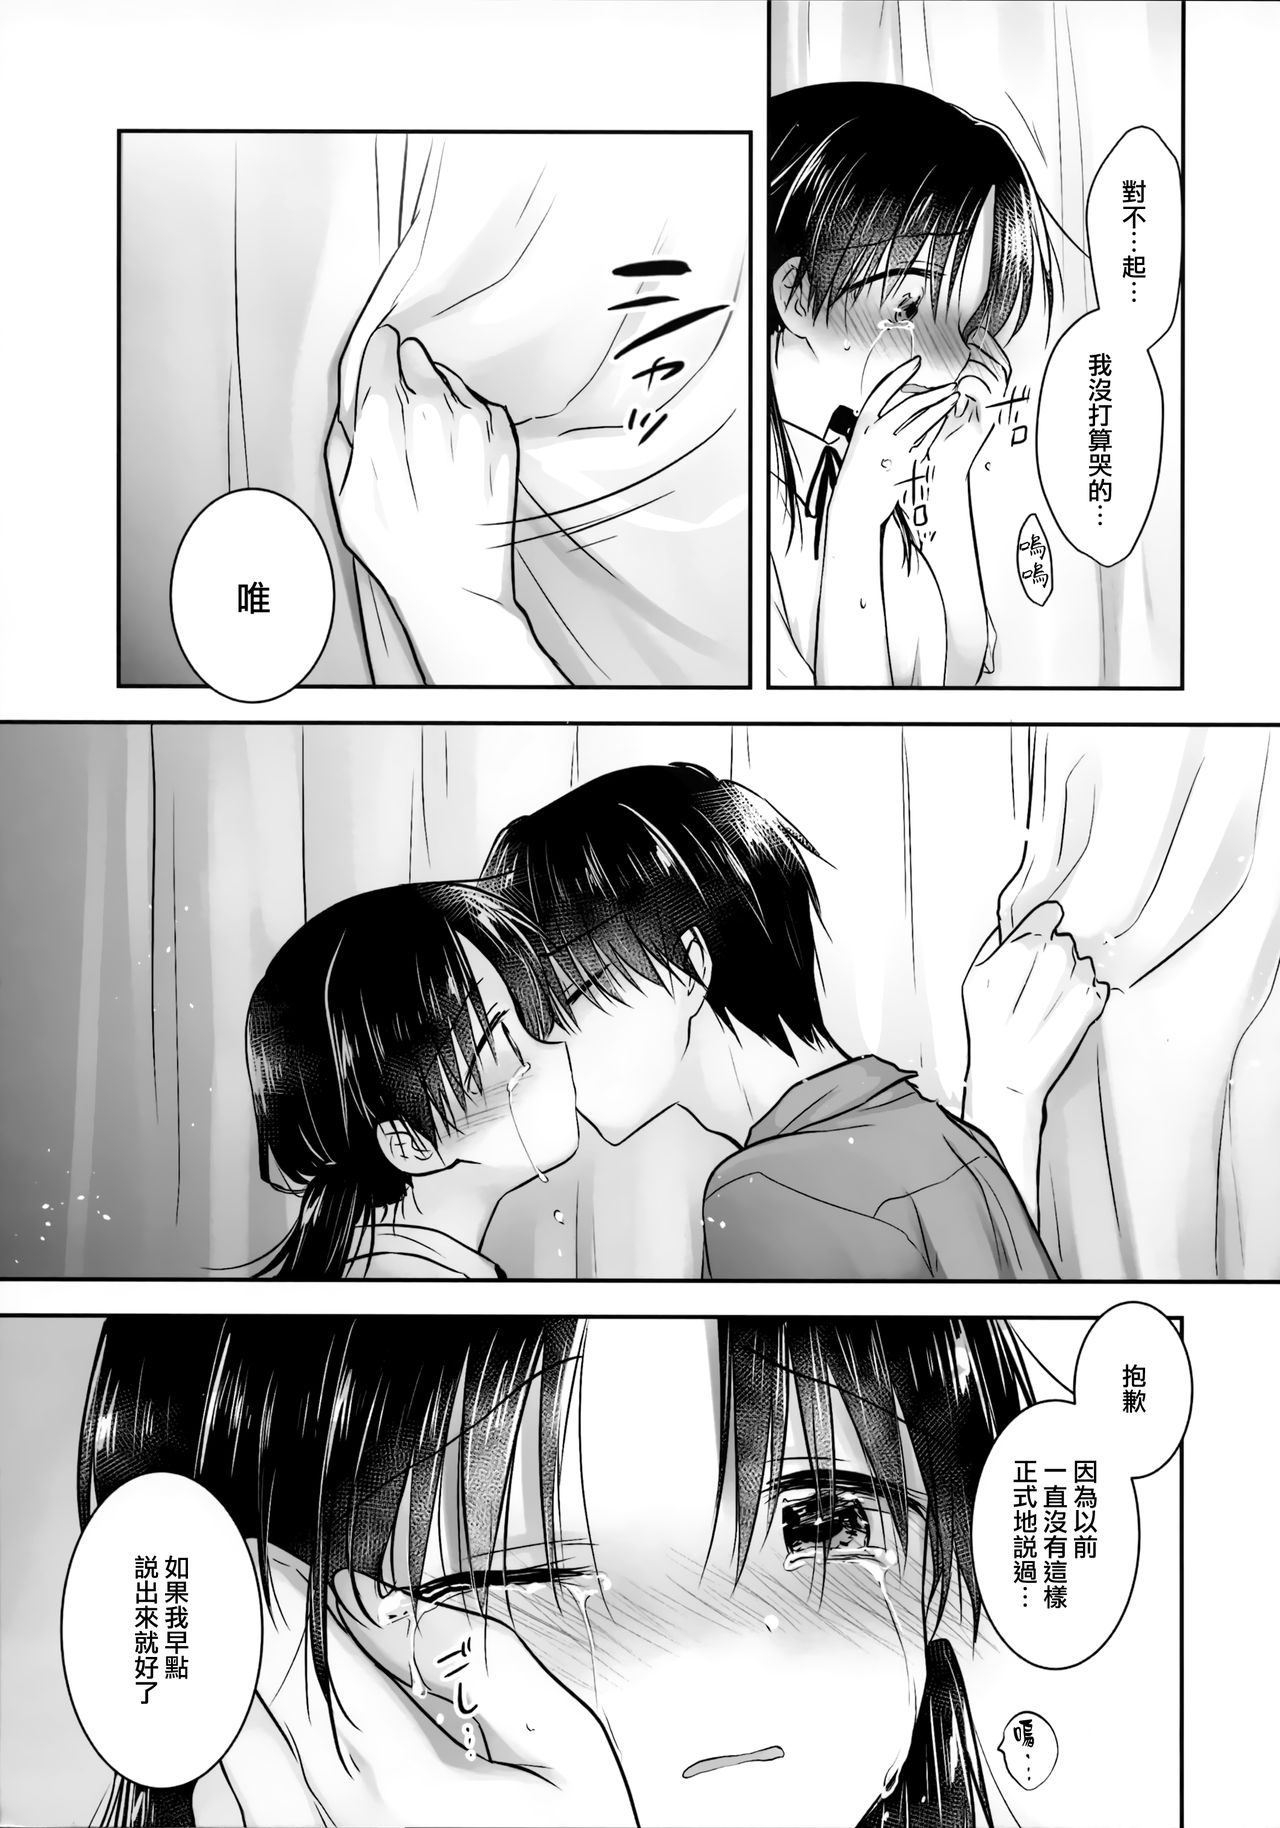 (C96) [Aquadrop (Mikami Mika)] Omoide Sex [Chinese] [山樱汉化] page 24 full